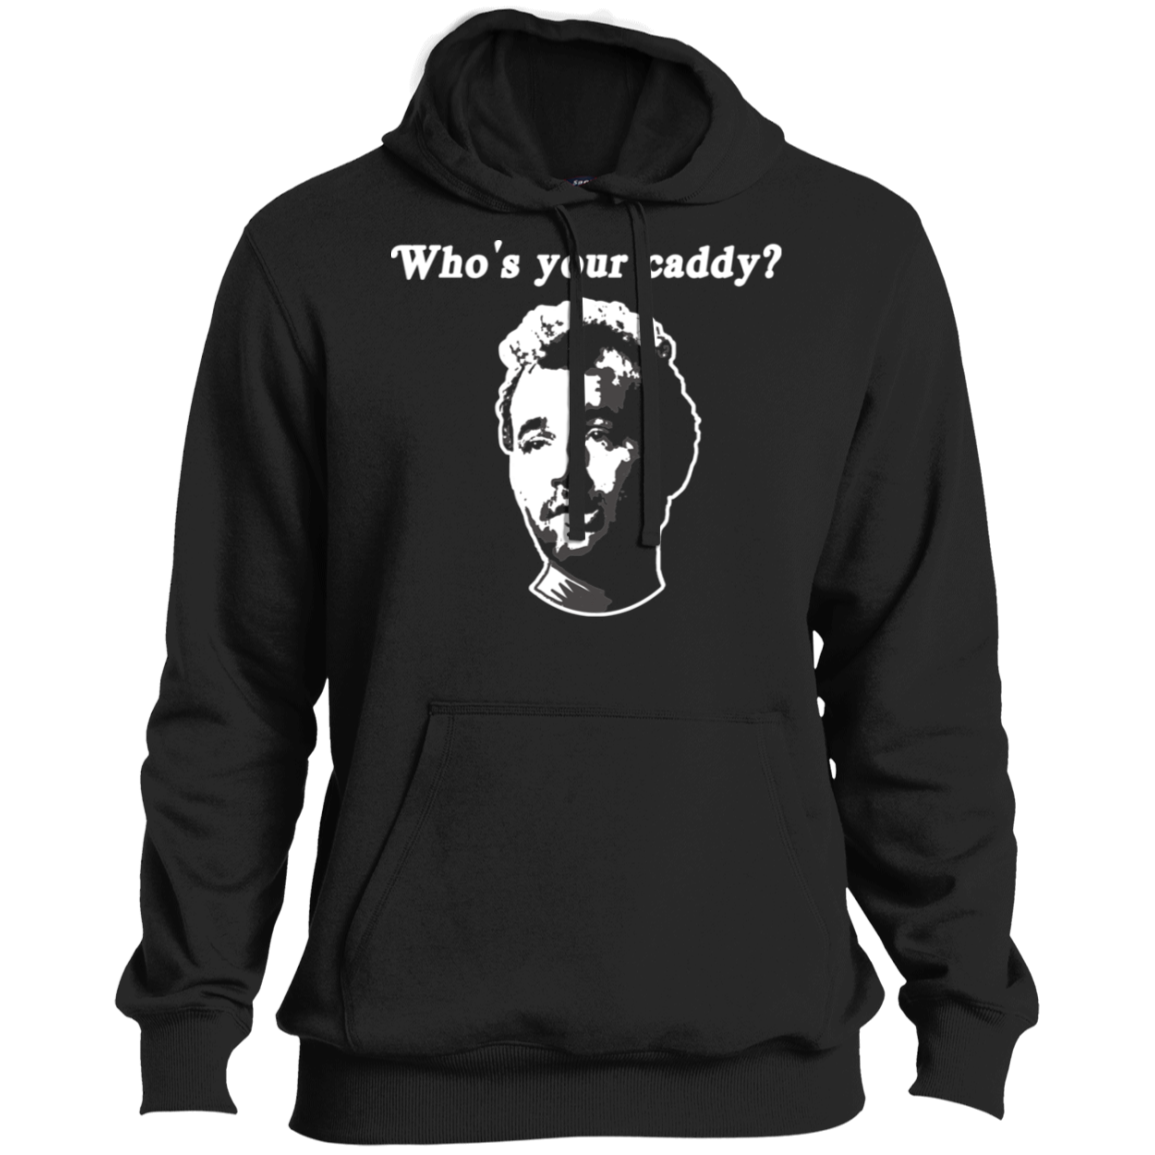 OPG Custom Design #29. Who's Your Caddy? Caddy Shack Bill Murray Fan Art. Soft Style Pullover Hoodie